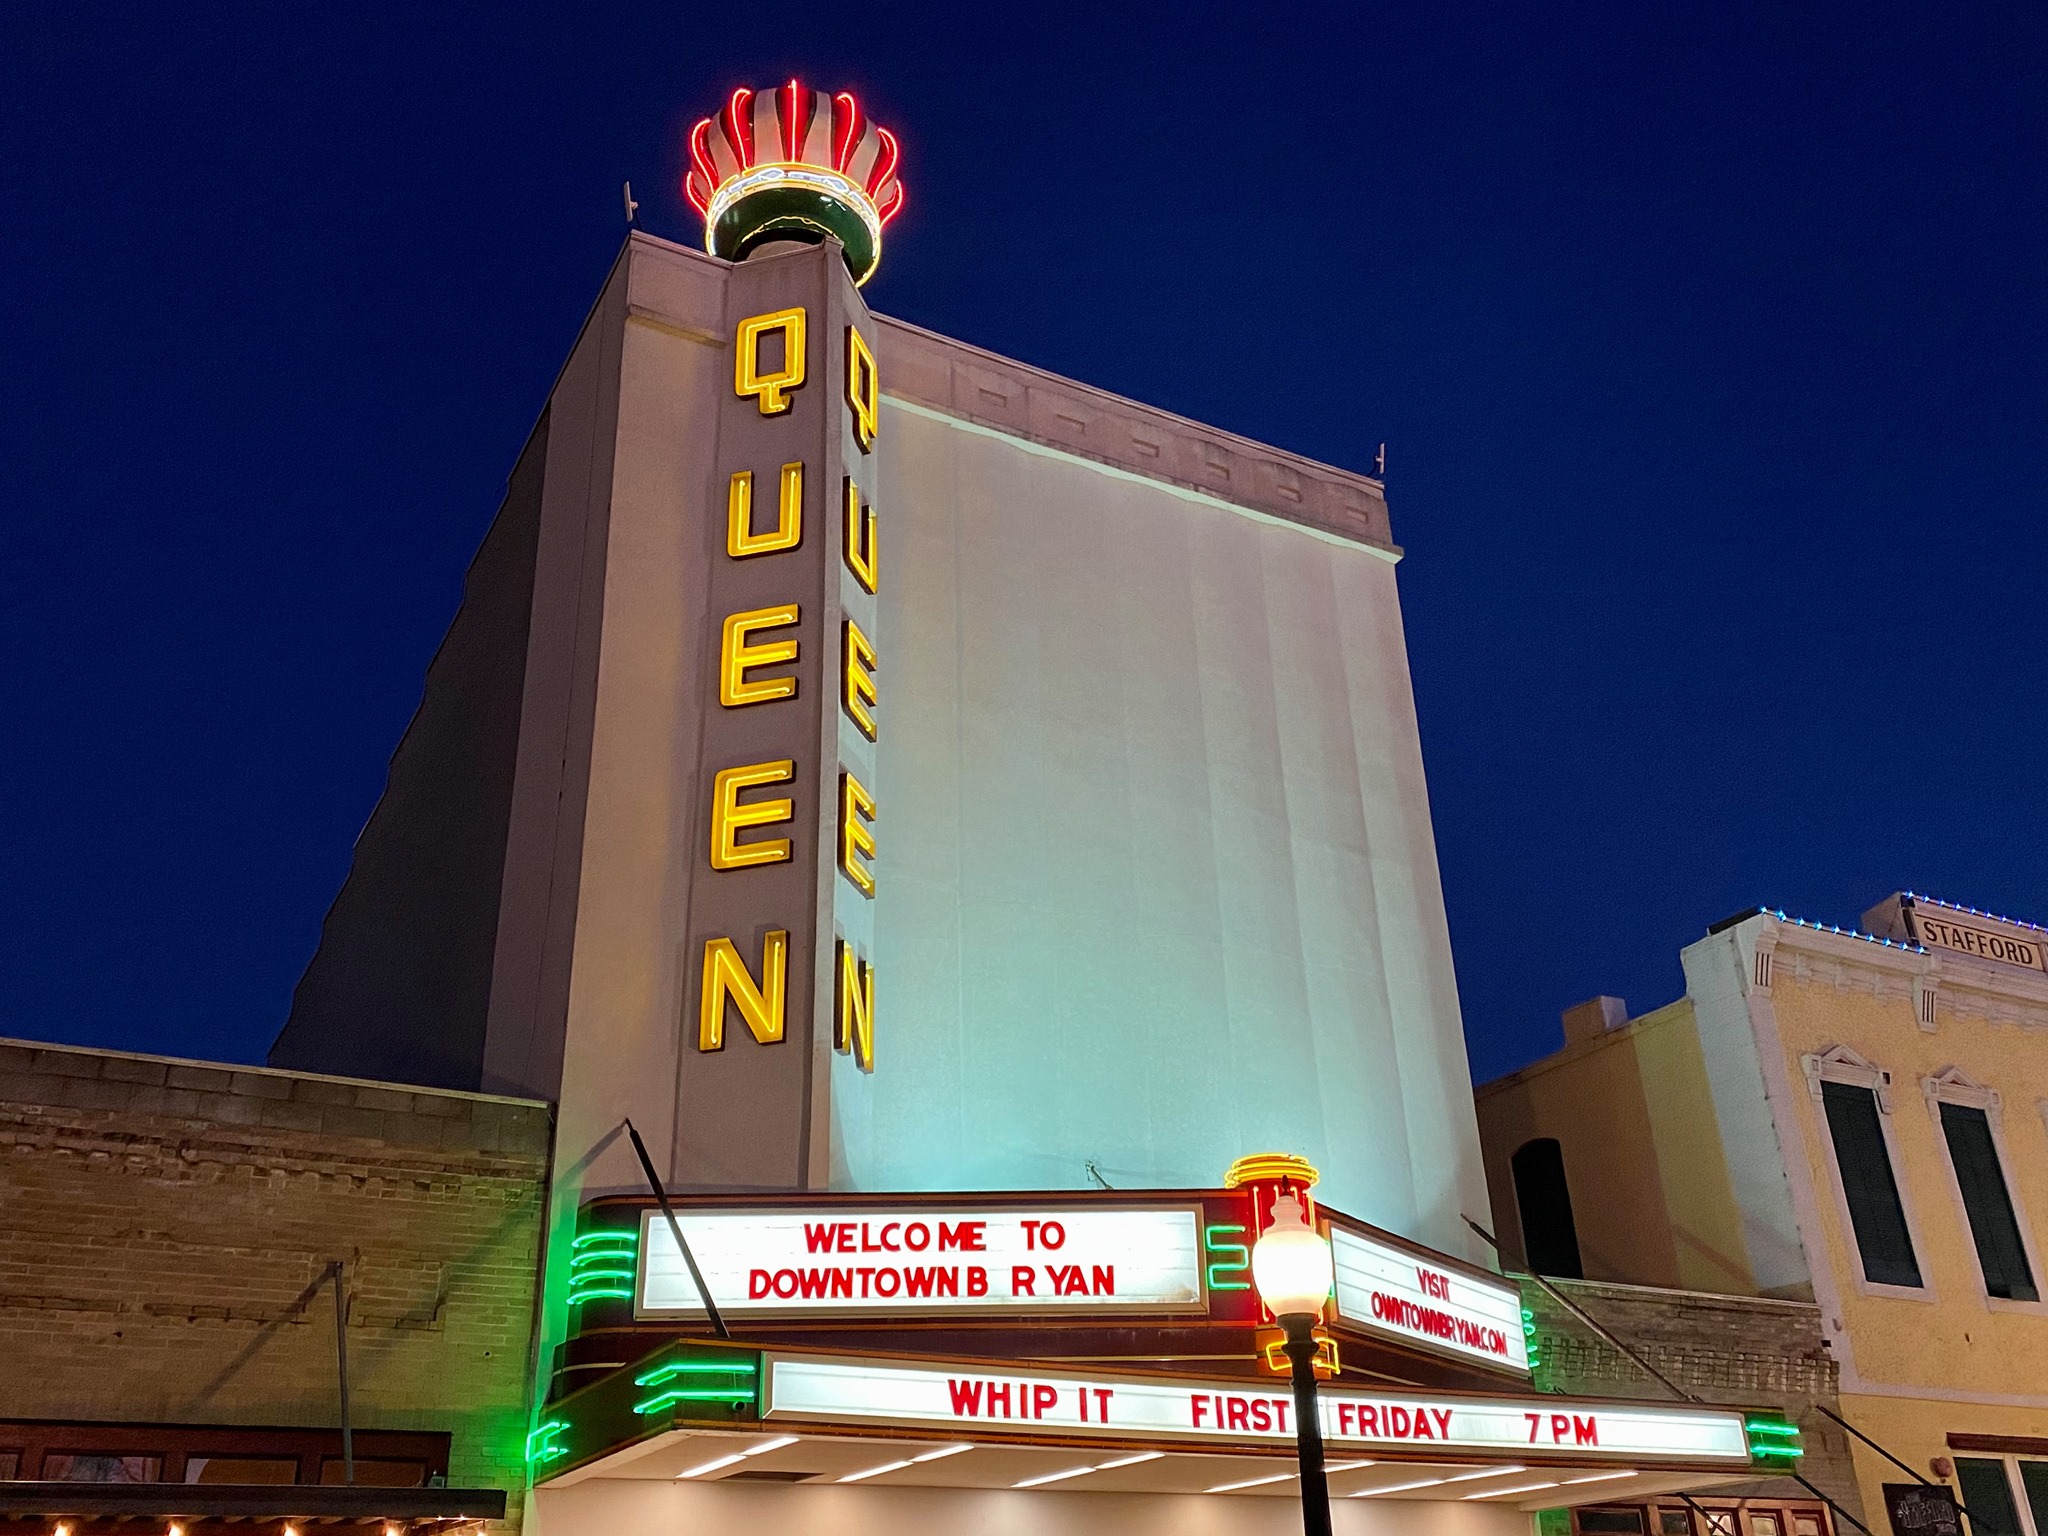 Two movie screening events to be held at Bryan's Queen Theatre